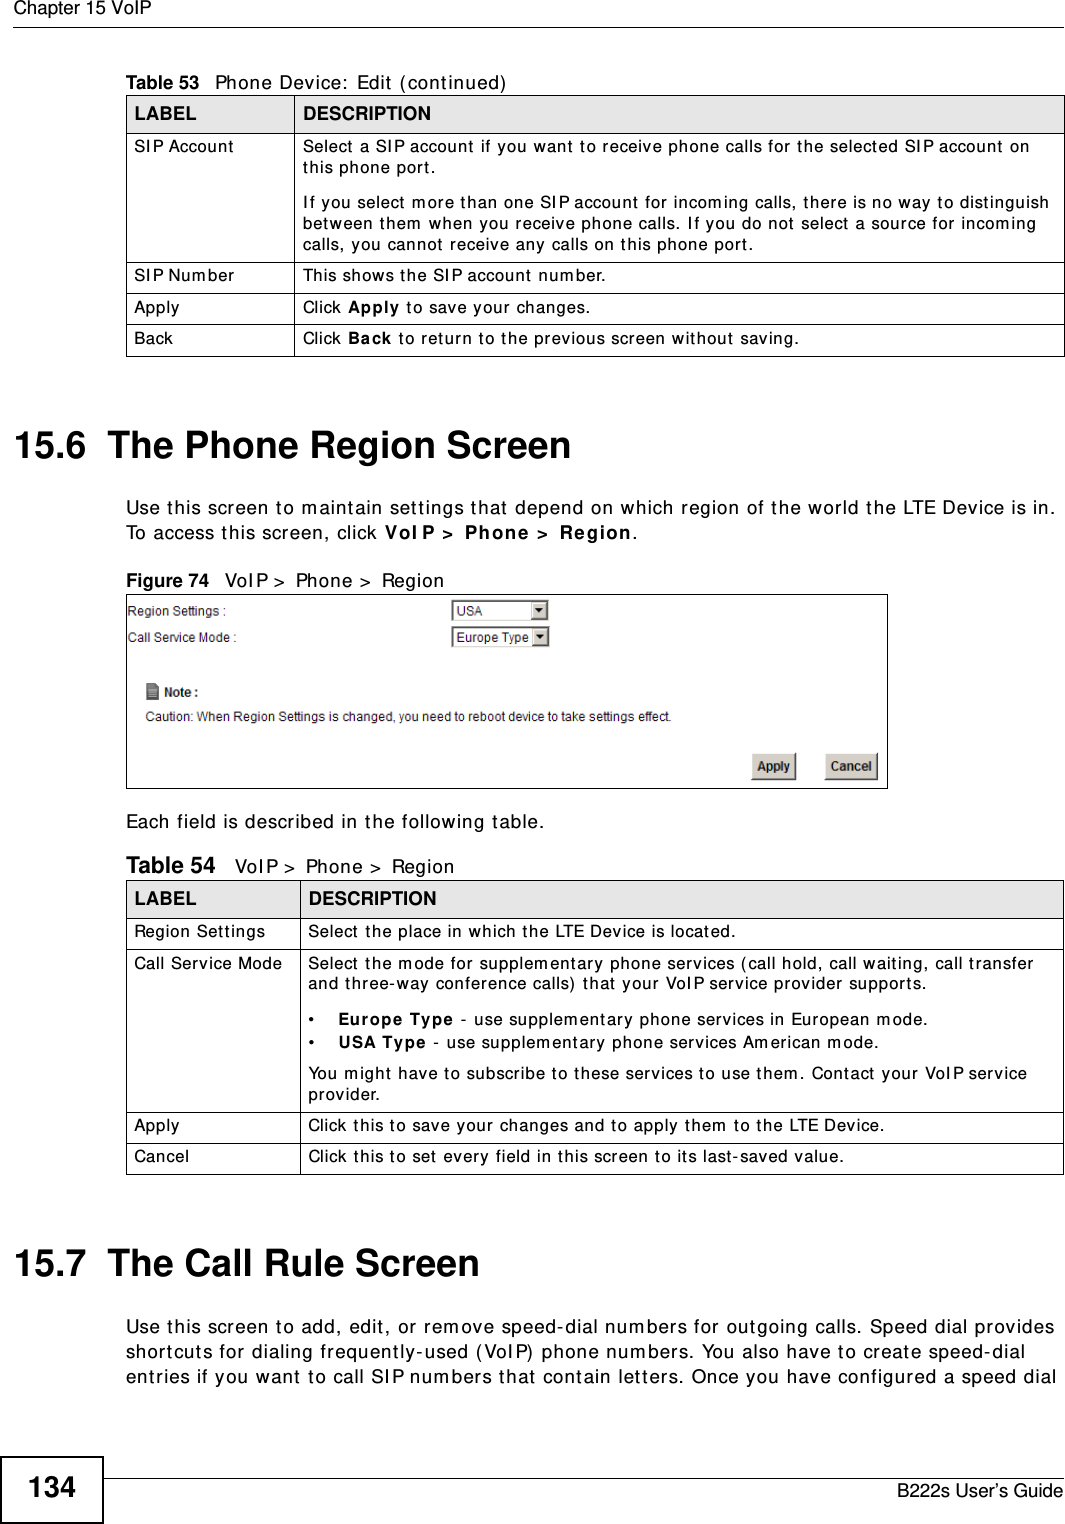 Chapter 15 VoIPB222s User’s Guide13415.6  The Phone Region ScreenUse t his screen t o m aint ain set t ings t hat  depend on which region of the world t he LTE Device is in. To access t his screen, click VoI P &gt;  Phone &gt;  Region.Figure 74   VoI P &gt;  Phon e &gt;  Reg i onEach field is described in t he following t able.15.7  The Call Rule ScreenUse t his screen t o add, edit , or rem ove speed-dial num bers for out going calls. Speed dial provides short cut s for dialing frequent ly- used ( VoI P)  phone num bers. You also have t o creat e speed-dial entries if you want  t o call SI P num bers t hat  contain let ters. Once you have configured a speed dial SI P Account Select  a SI P account if you want t o receiv e phone calls for t he selected SI P account  on this phone por t.I f you select  m or e t han one SI P account  for incom ing calls, t here is no way t o distinguish bet ween t hem  when you receive phone calls. I f you do not  select  a source for incom ing calls, y ou cannot  receive any calls on this phone port.SI P Num ber This shows t he SI P account num ber.Apply Click Apply t o save your changes.Back Click Back t o return t o t he previous screen w it hout  saving.Table 53   Phone Device:  Edit  ( cont inued)LABEL DESCRIPTIONTable 54   VoI P &gt;  Phone &gt;  RegionLABEL DESCRIPTIONRegion Set t ings Select  the place in which the LTE Device is locat ed.Call Service Mode Select t he m ode for supplem ent ary phone ser vices ( call hold, call wait ing, call t ransfer  and three-way conference calls)  t hat  your VoI P serv ice provider support s.•Eur ope  Type  - use supplement ary phone services in European m ode.•USA Type - use supplem ent ary phone services Am erican m ode.You m ight  have t o subscribe t o t hese services t o use t hem . Cont act  your VoI P service provider.Apply Click t his t o save your changes and t o apply t hem  to t he LTE Device.Cancel Click t his t o set  every field in this screen to it s last- saved value.